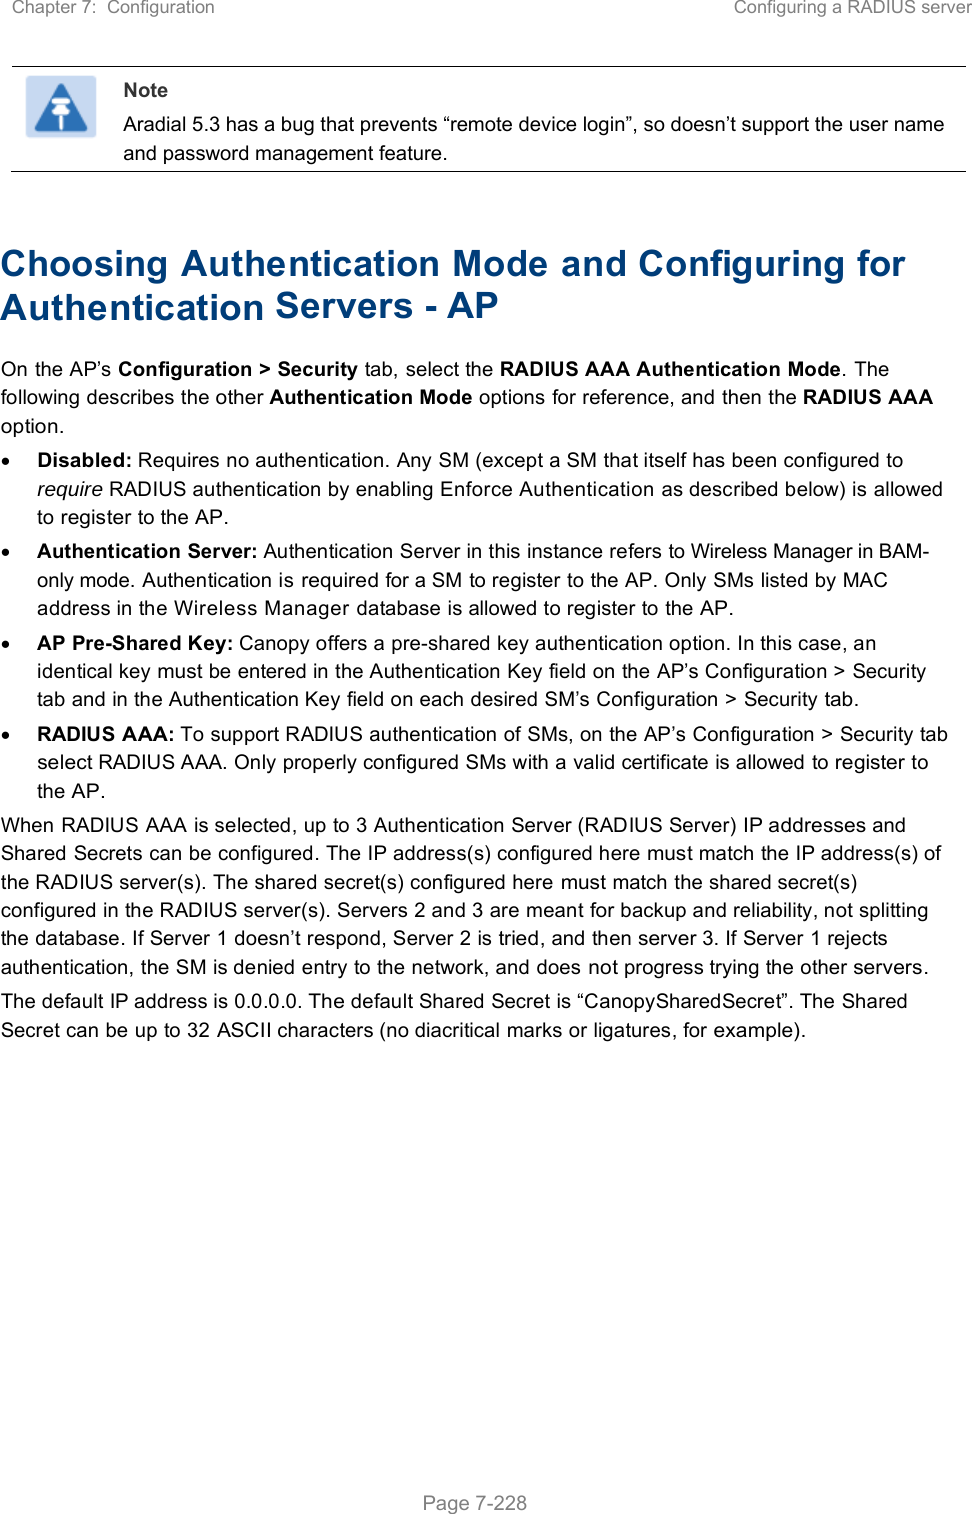 Chapter 7:  Configuration  Configuring a RADIUS server   Page 7-228  Note Aradial 5.3 has a bug that prevents “remote device login”, so doesn’t support the user name and password management feature.  Choosing Authentication Mode and Configuring for Authentication Servers - AP On the AP’s Configuration &gt; Security tab, select the RADIUS AAA Authentication Mode. The following describes the other Authentication Mode options for reference, and then the RADIUS AAA option.  Disabled: Requires no authentication. Any SM (except a SM that itself has been configured to require RADIUS authentication by enabling Enforce Authentication as described below) is allowed to register to the AP.  Authentication Server: Authentication Server in this instance refers to Wireless Manager in BAM-only mode. Authentication is required for a SM to register to the AP. Only SMs listed by MAC address in the Wireless Manager database is allowed to register to the AP.  AP Pre-Shared Key: Canopy offers a pre-shared key authentication option. In this case, an identical key must be entered in the Authentication Key field on the AP’s Configuration &gt; Security tab and in the Authentication Key field on each desired SM’s Configuration &gt; Security tab.  RADIUS AAA: To support RADIUS authentication of SMs, on the AP’s Configuration &gt; Security tab select RADIUS AAA. Only properly configured SMs with a valid certificate is allowed to register to the AP. When RADIUS AAA is selected, up to 3 Authentication Server (RADIUS Server) IP addresses and Shared Secrets can be configured. The IP address(s) configured here must match the IP address(s) of the RADIUS server(s). The shared secret(s) configured here must match the shared secret(s) configured in the RADIUS server(s). Servers 2 and 3 are meant for backup and reliability, not splitting the database. If Server 1 doesn’t respond, Server 2 is tried, and then server 3. If Server 1 rejects authentication, the SM is denied entry to the network, and does not progress trying the other servers. The default IP address is 0.0.0.0. The default Shared Secret is “CanopySharedSecret”. The Shared Secret can be up to 32 ASCII characters (no diacritical marks or ligatures, for example).  